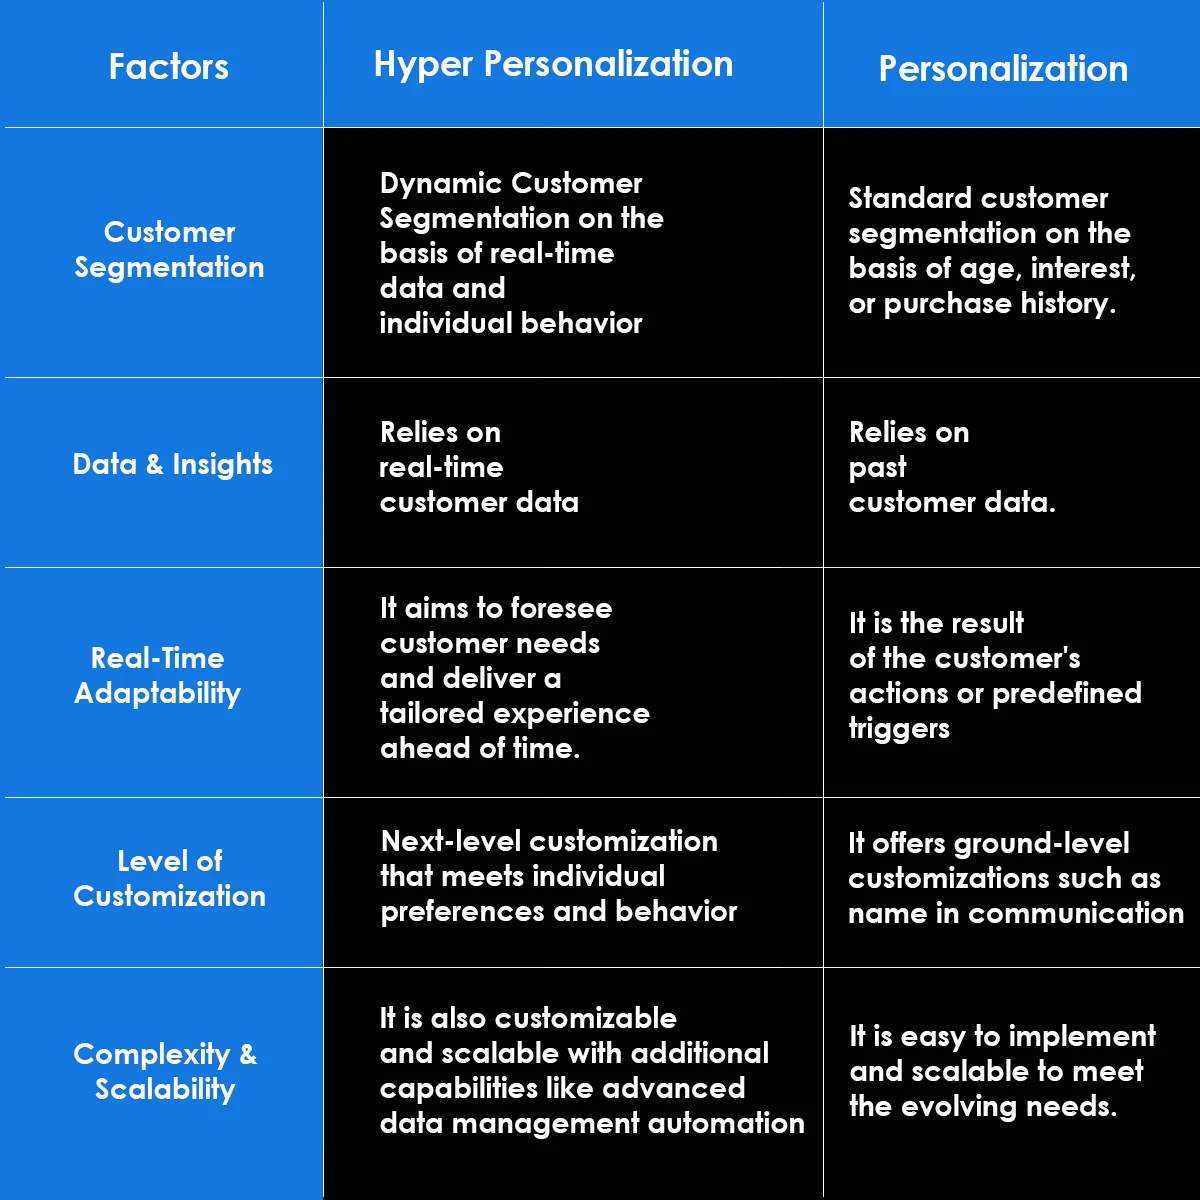 difference between Hyper-Personalization and Personalization